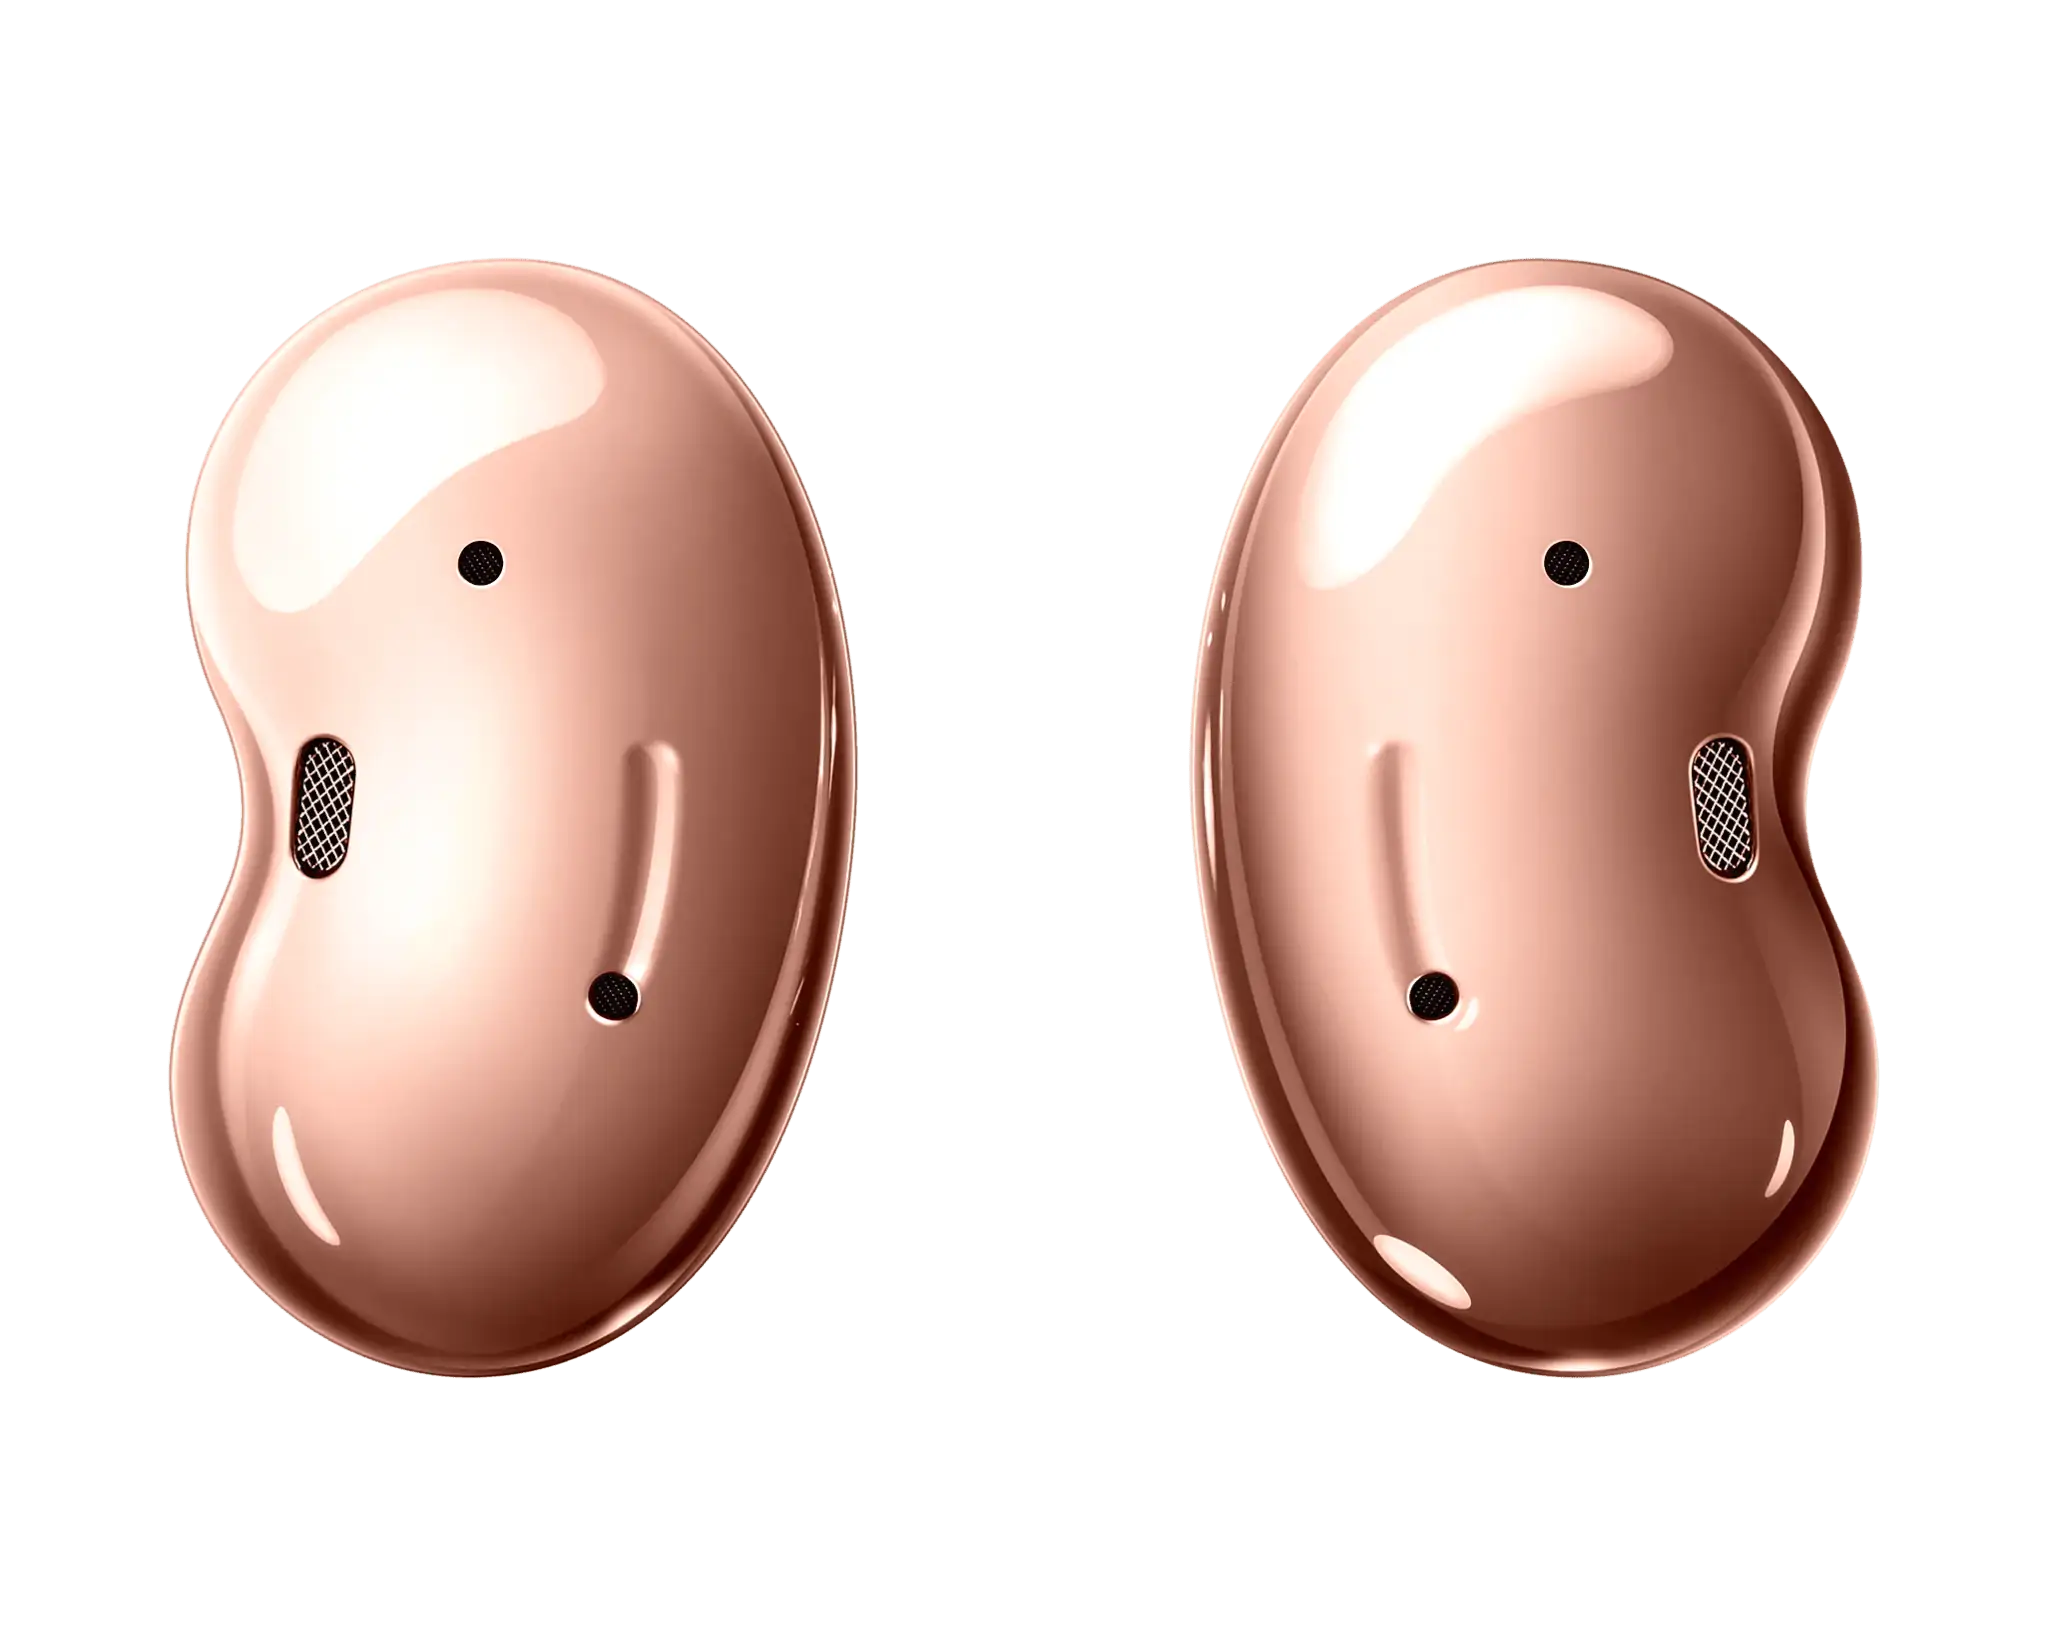 AirPods vs Galaxy Buds Live